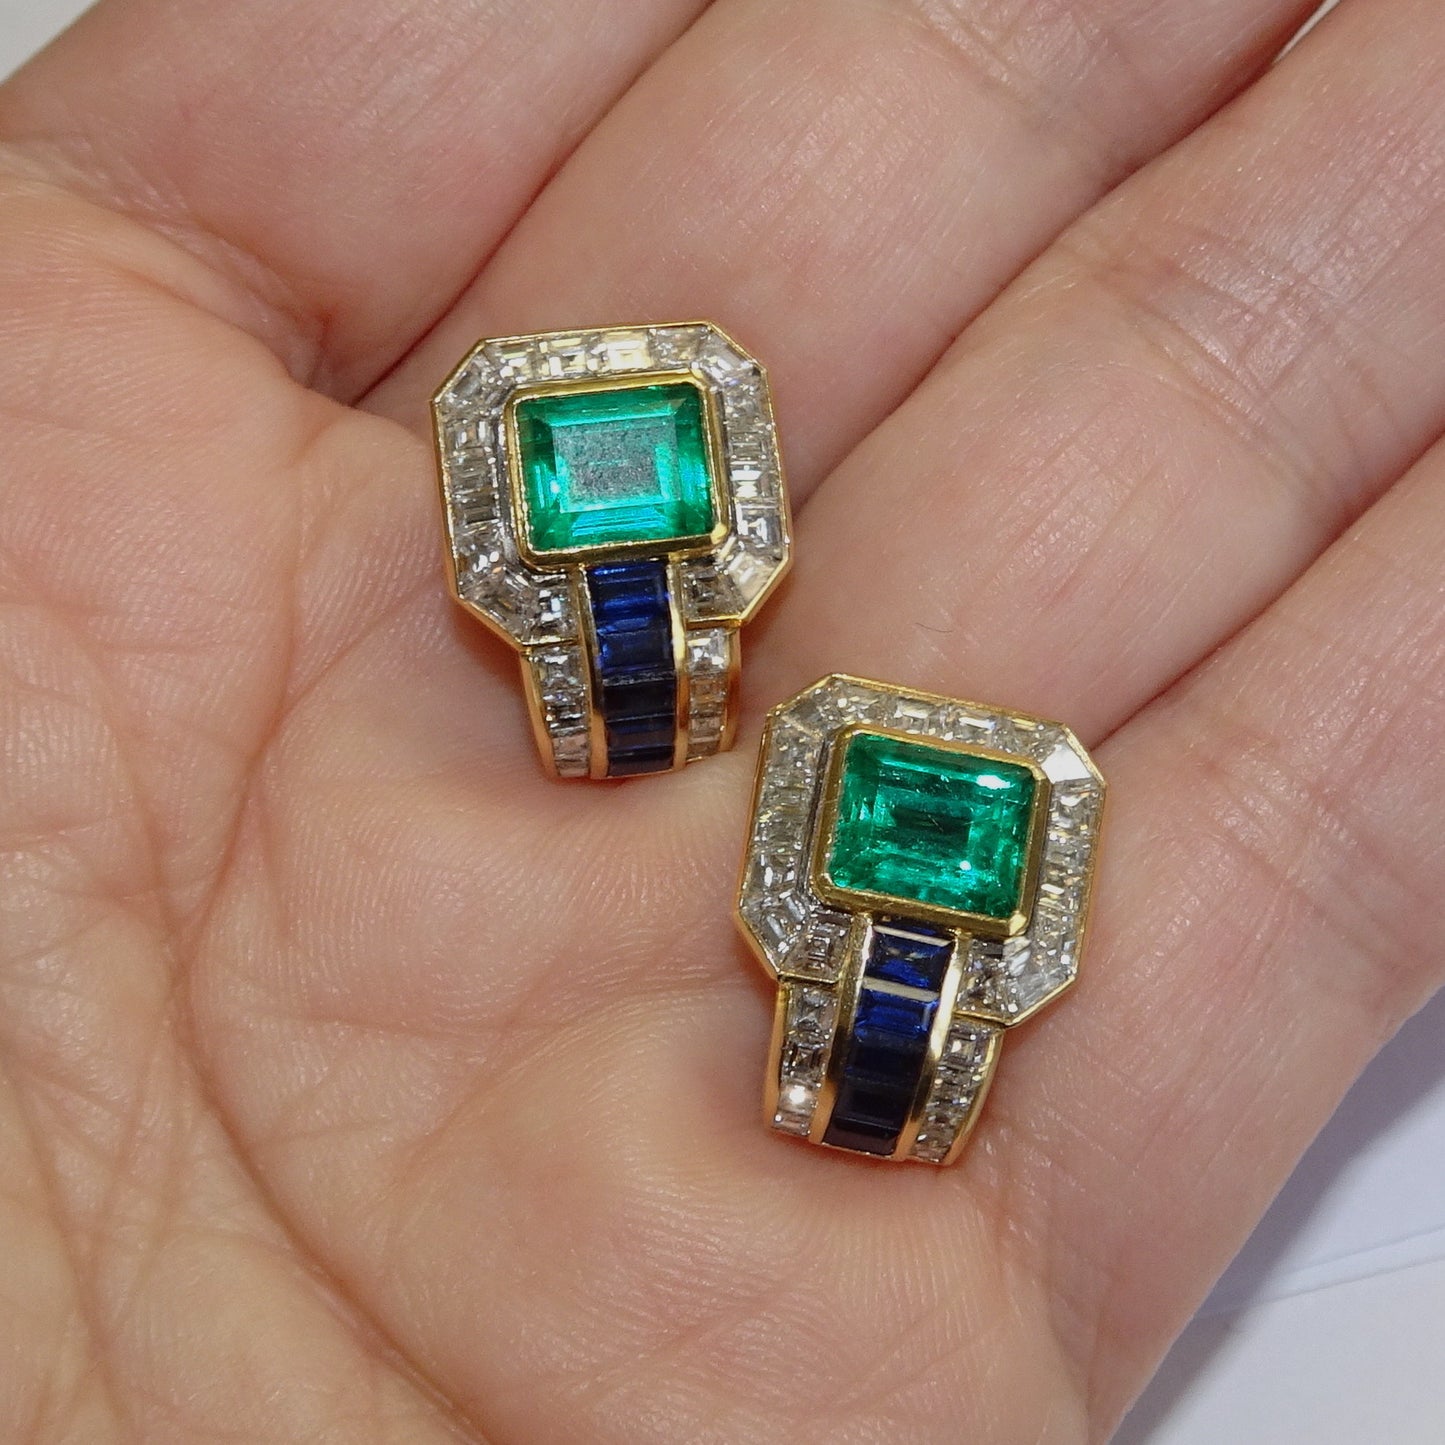 A. Hörner 1980s 18KT Yellow Gold Emerald, Diamond & Sapphire Earrings in hand